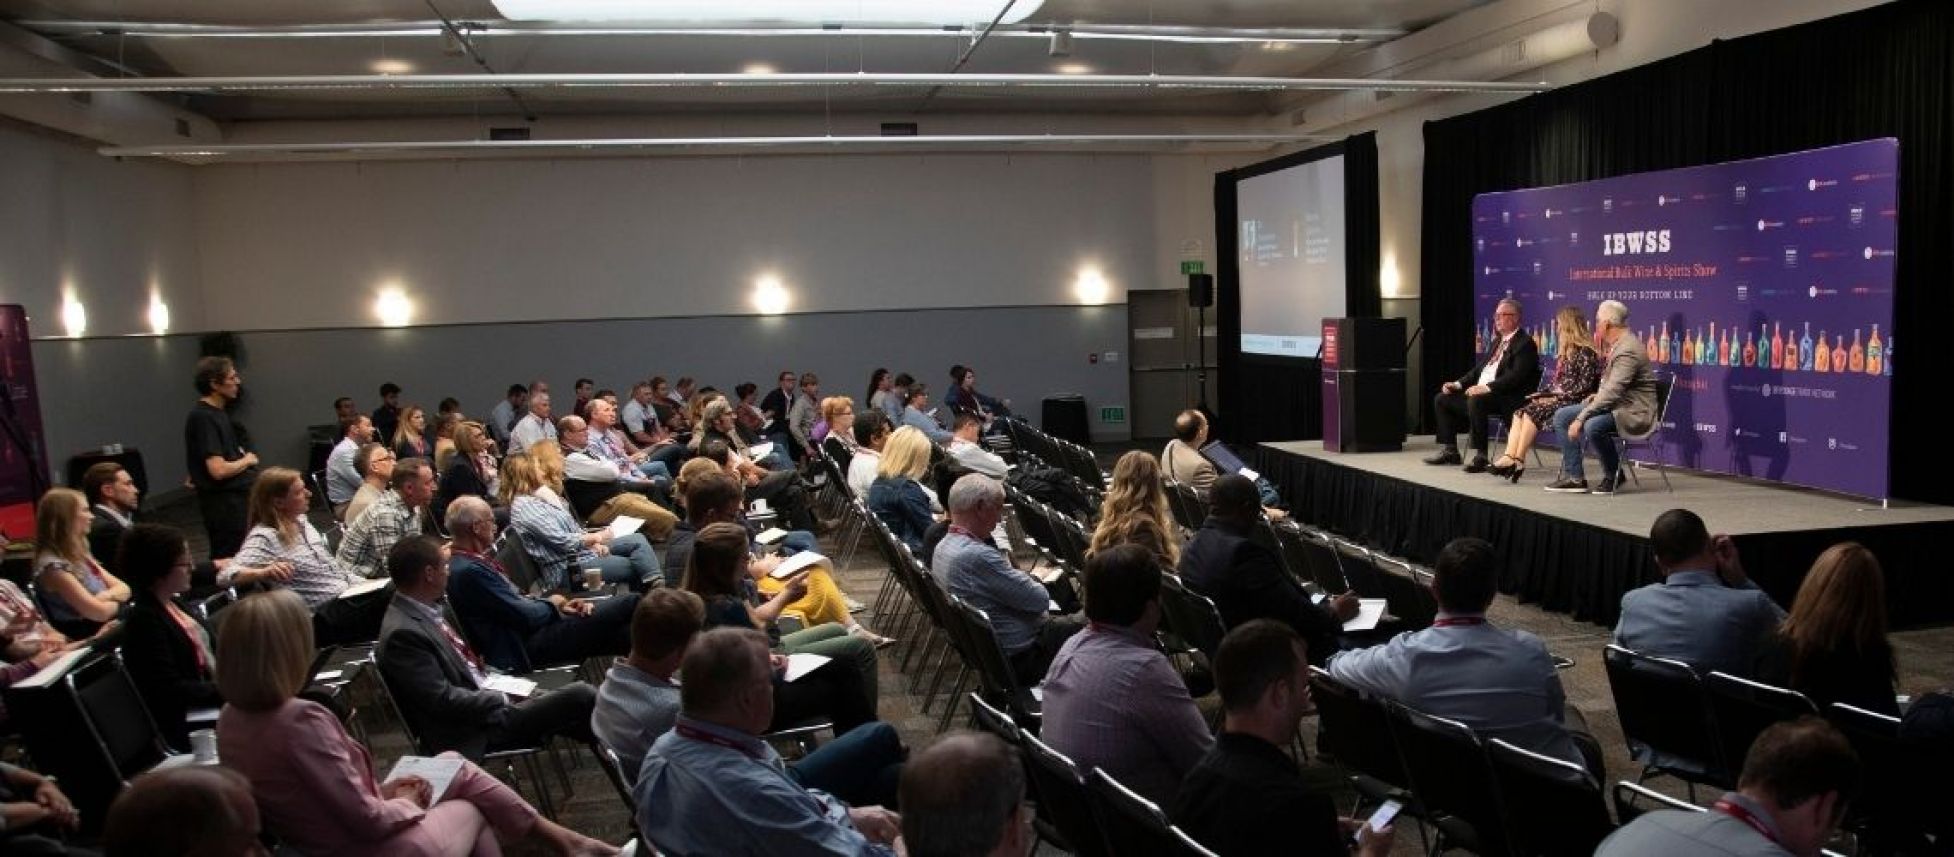 Photo for: Top Wine and Spirits Speakers Lined Up for IBWSS Conference